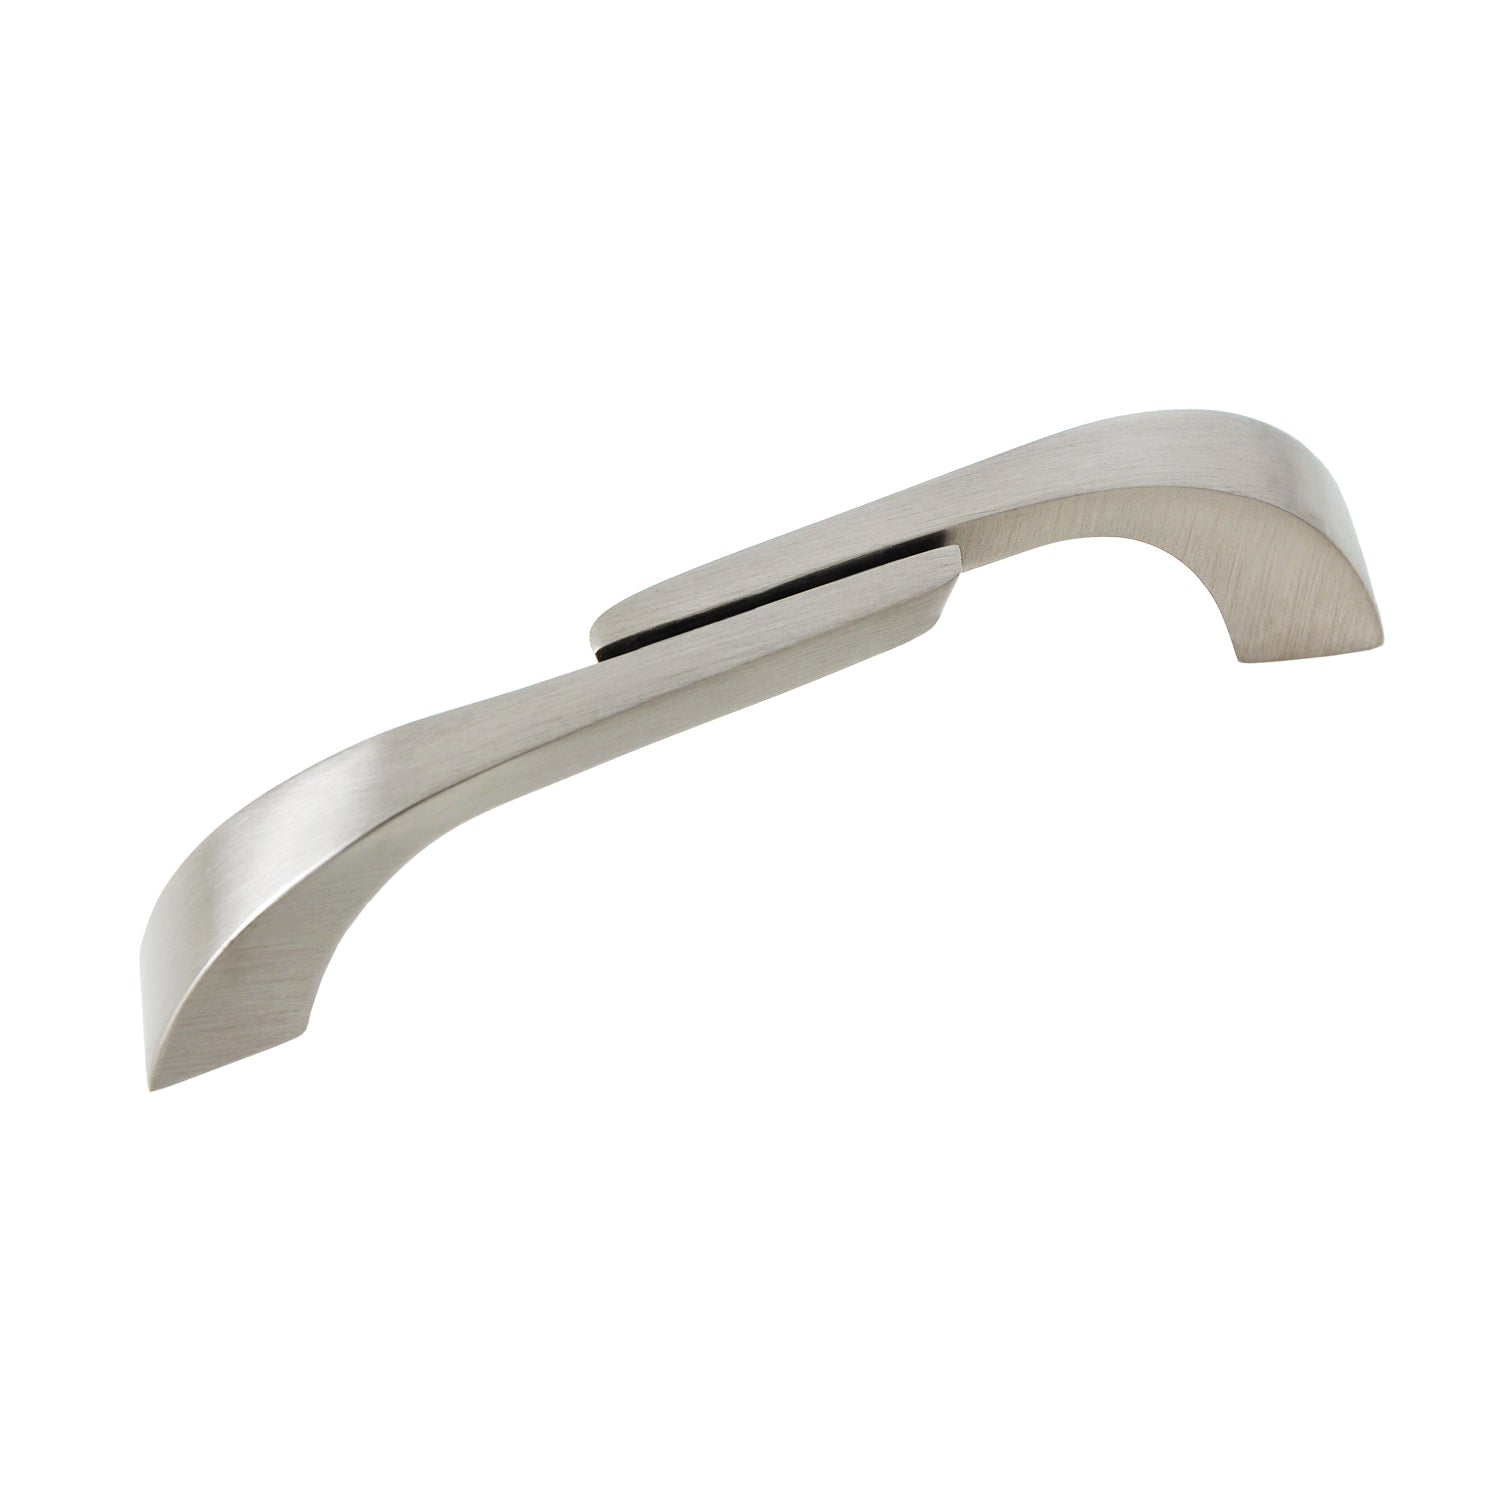 Utopia Alley Criss Cabinet Pull, 4" Center To Center, Brushed Nickel